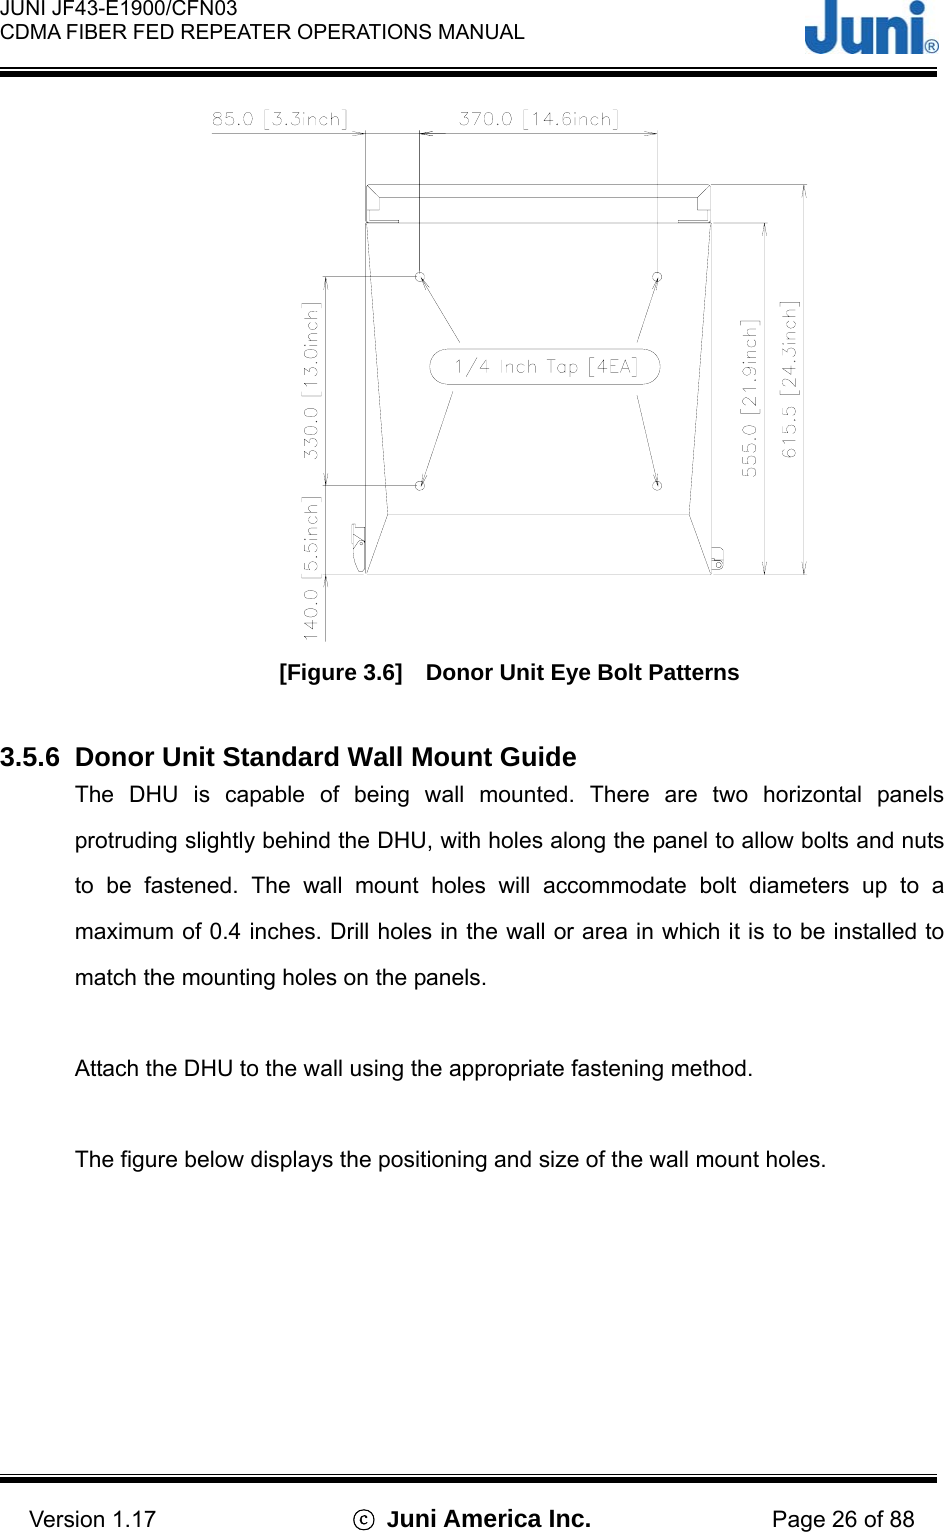  JUNI JF43-E1900/CFN03 CDMA FIBER FED REPEATER OPERATIONS MANUAL                                    Version 1.17  ⓒ Juni America Inc. Page 26 of 88  [Figure 3.6]    Donor Unit Eye Bolt Patterns  3.5.6  Donor Unit Standard Wall Mount Guide The DHU is capable of being wall mounted. There are two horizontal panels protruding slightly behind the DHU, with holes along the panel to allow bolts and nuts to be fastened. The wall mount holes will accommodate bolt diameters up to a maximum of 0.4 inches. Drill holes in the wall or area in which it is to be installed to match the mounting holes on the panels.  Attach the DHU to the wall using the appropriate fastening method.  The figure below displays the positioning and size of the wall mount holes.  